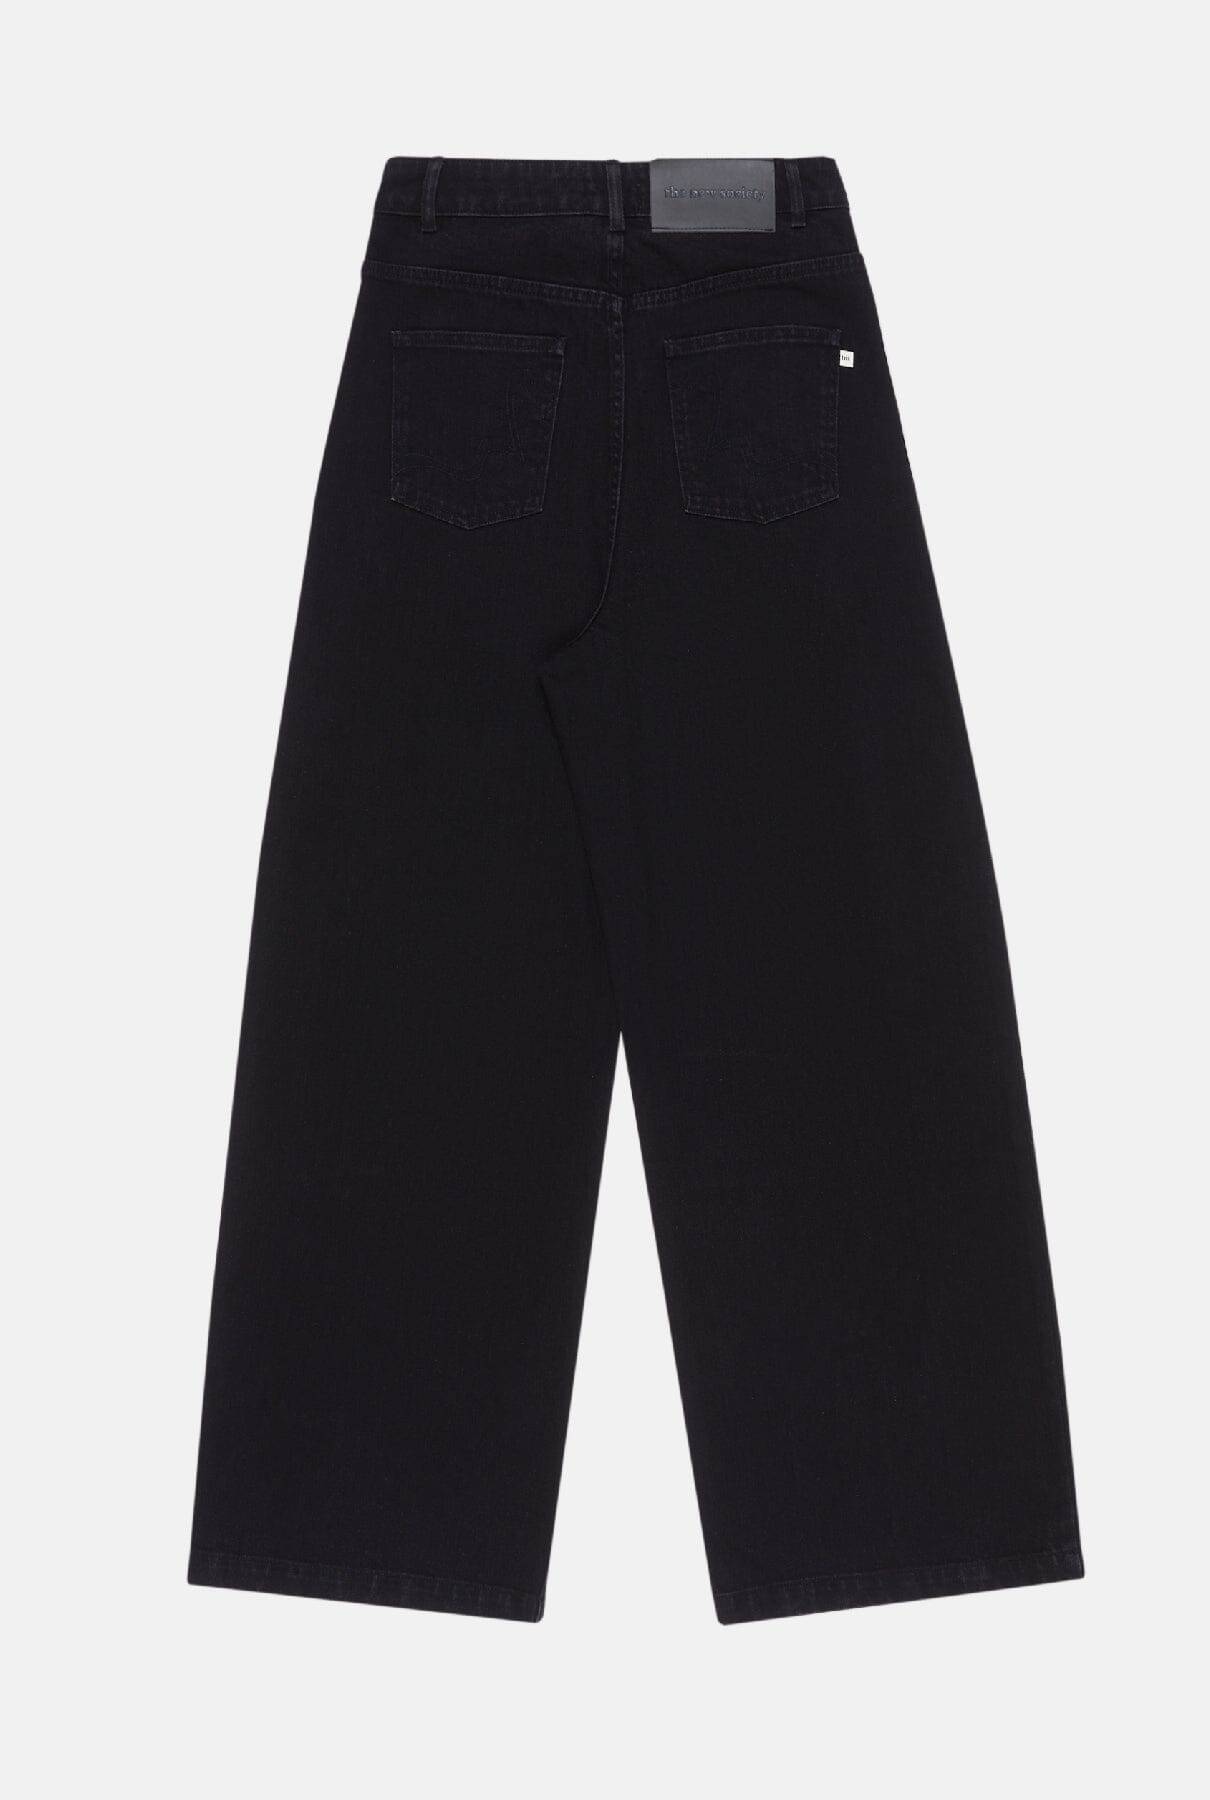 Woodland Denim Woman Pant Black Trousers The New Society 